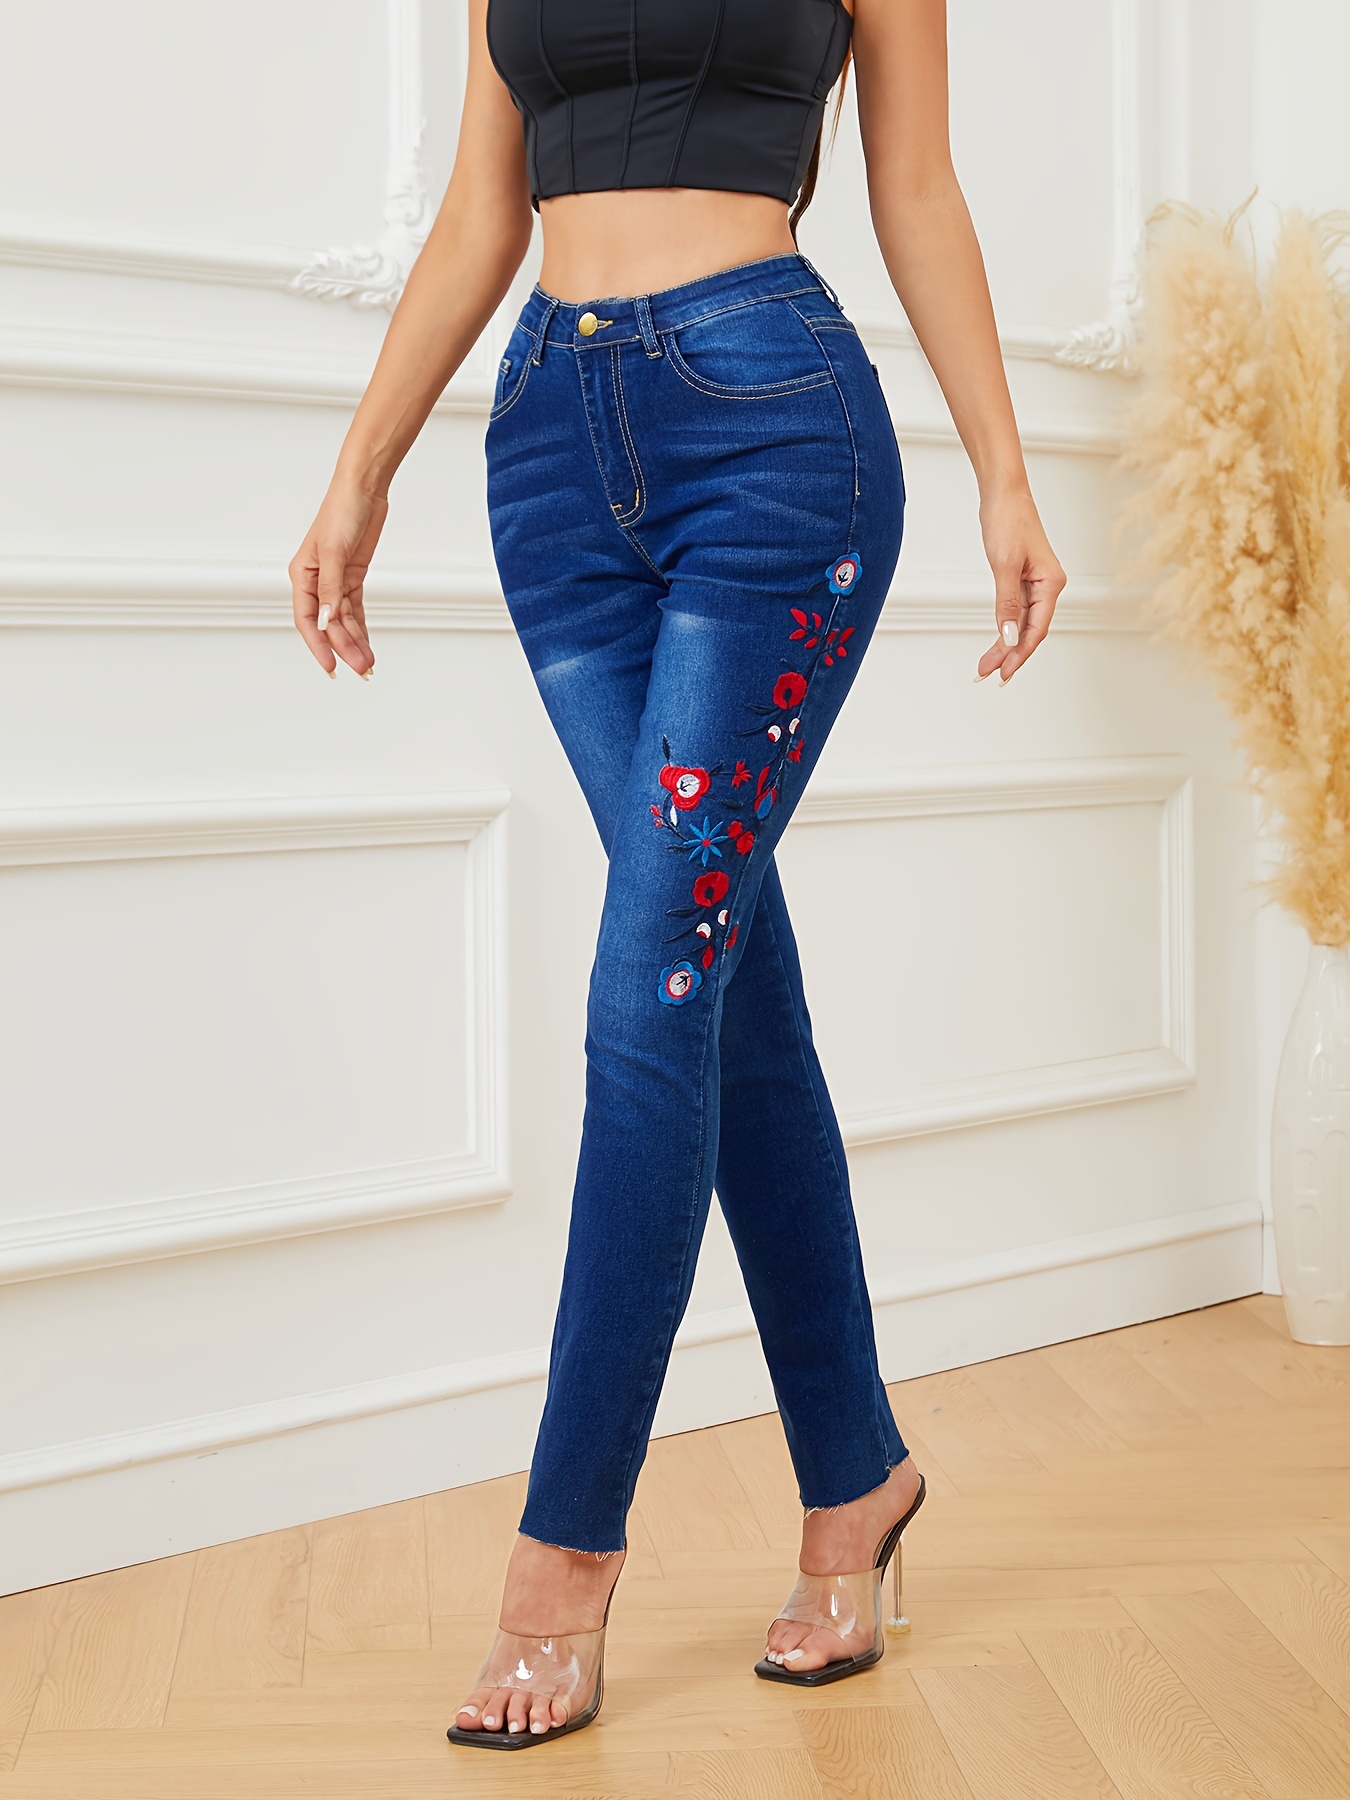 Flower Embroidery Skinny Jeans, High-waisted Cut Hem Fashion Stretchy Tight  Jeans, Women's Denim Jeans & Clothing